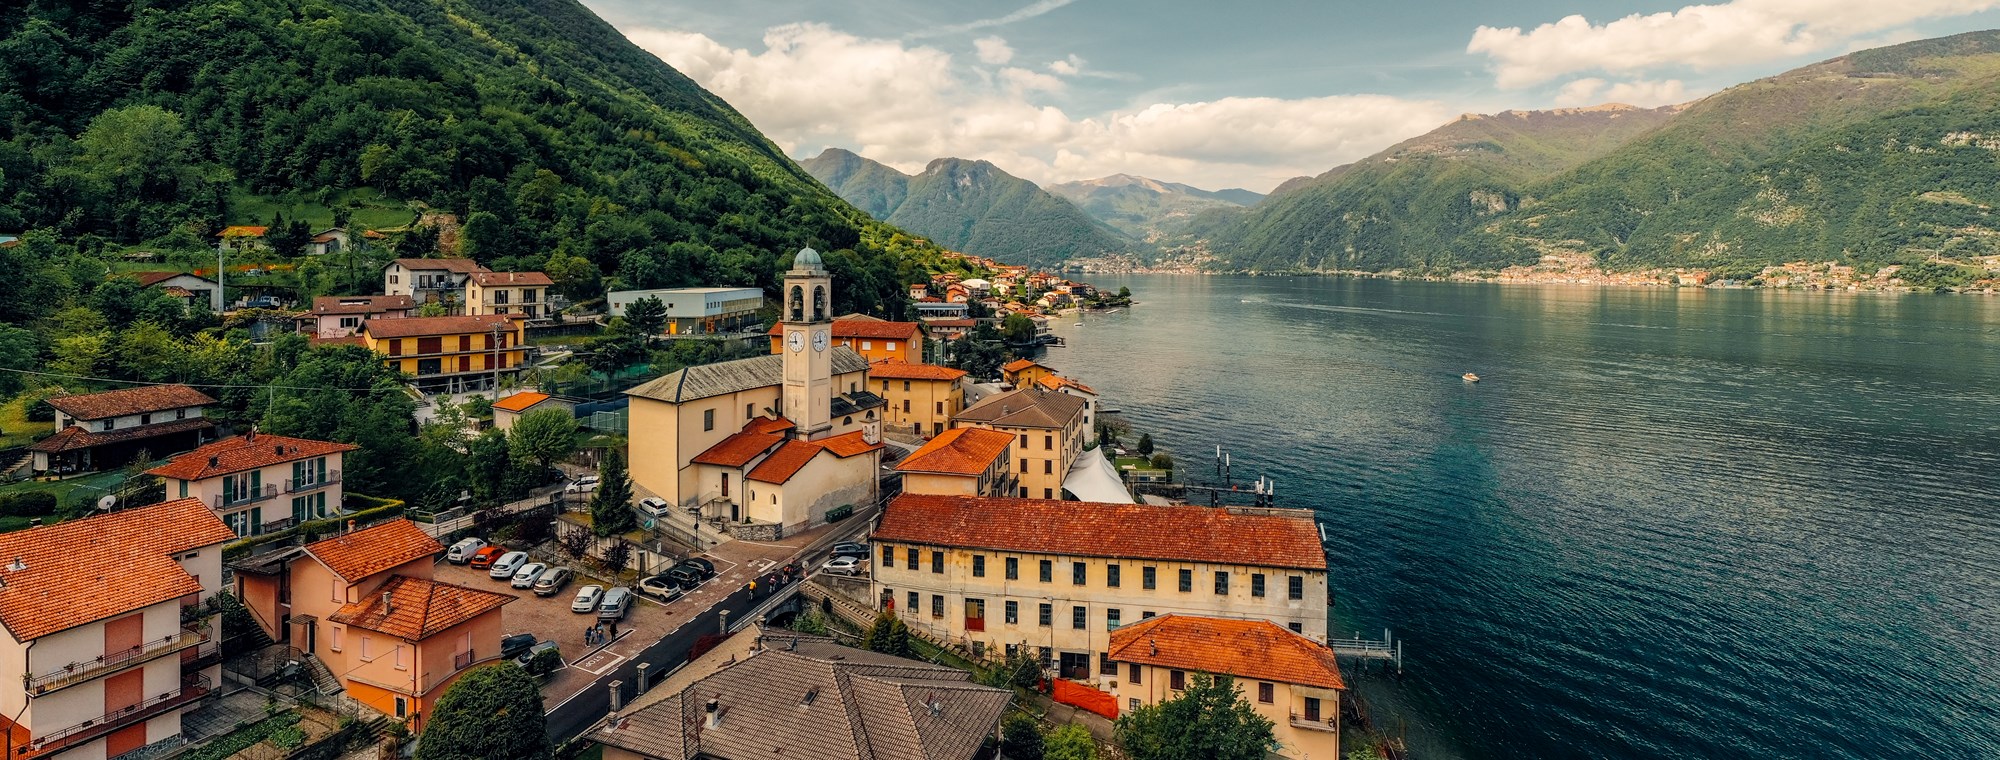 Italy Lake District Como Mountains Buildings Water Landscape Colorful Houses Red Roofs Birds Eye View Shore Church